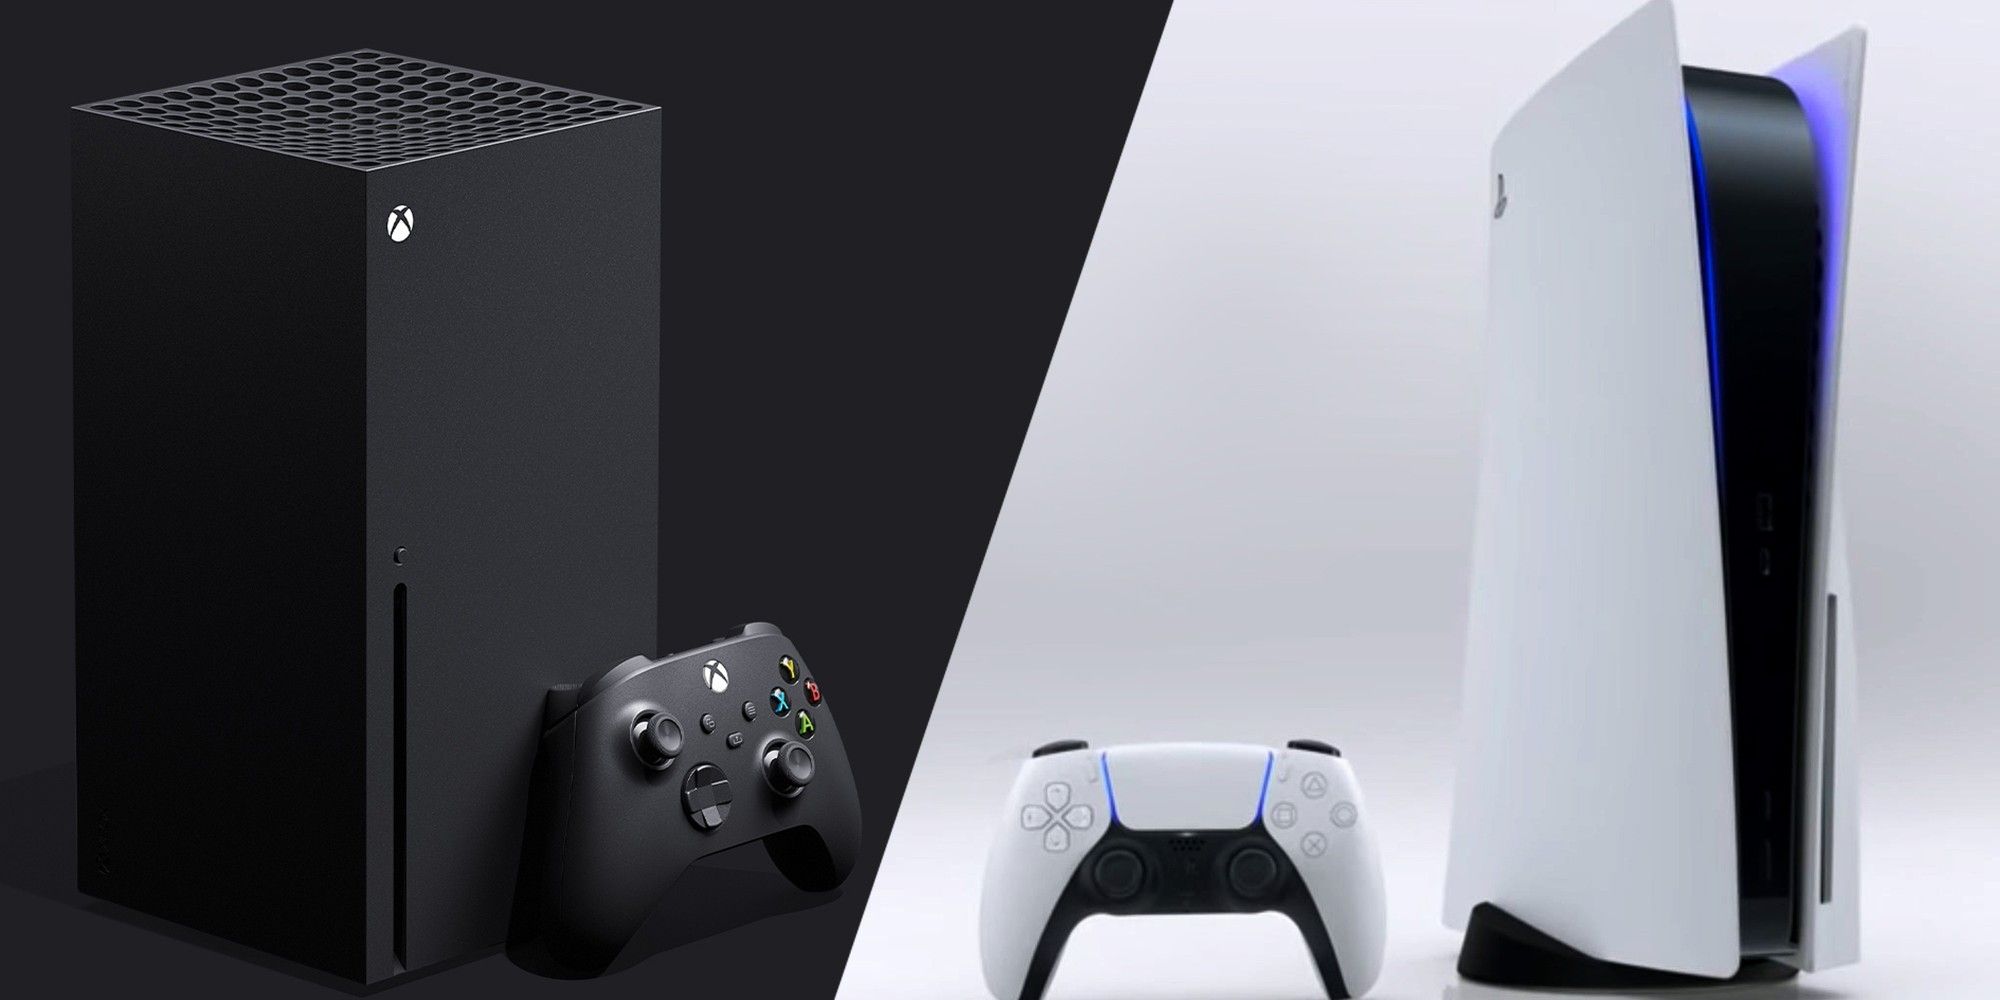 Xbox Series X and PlayStation 5 consoles with controllers